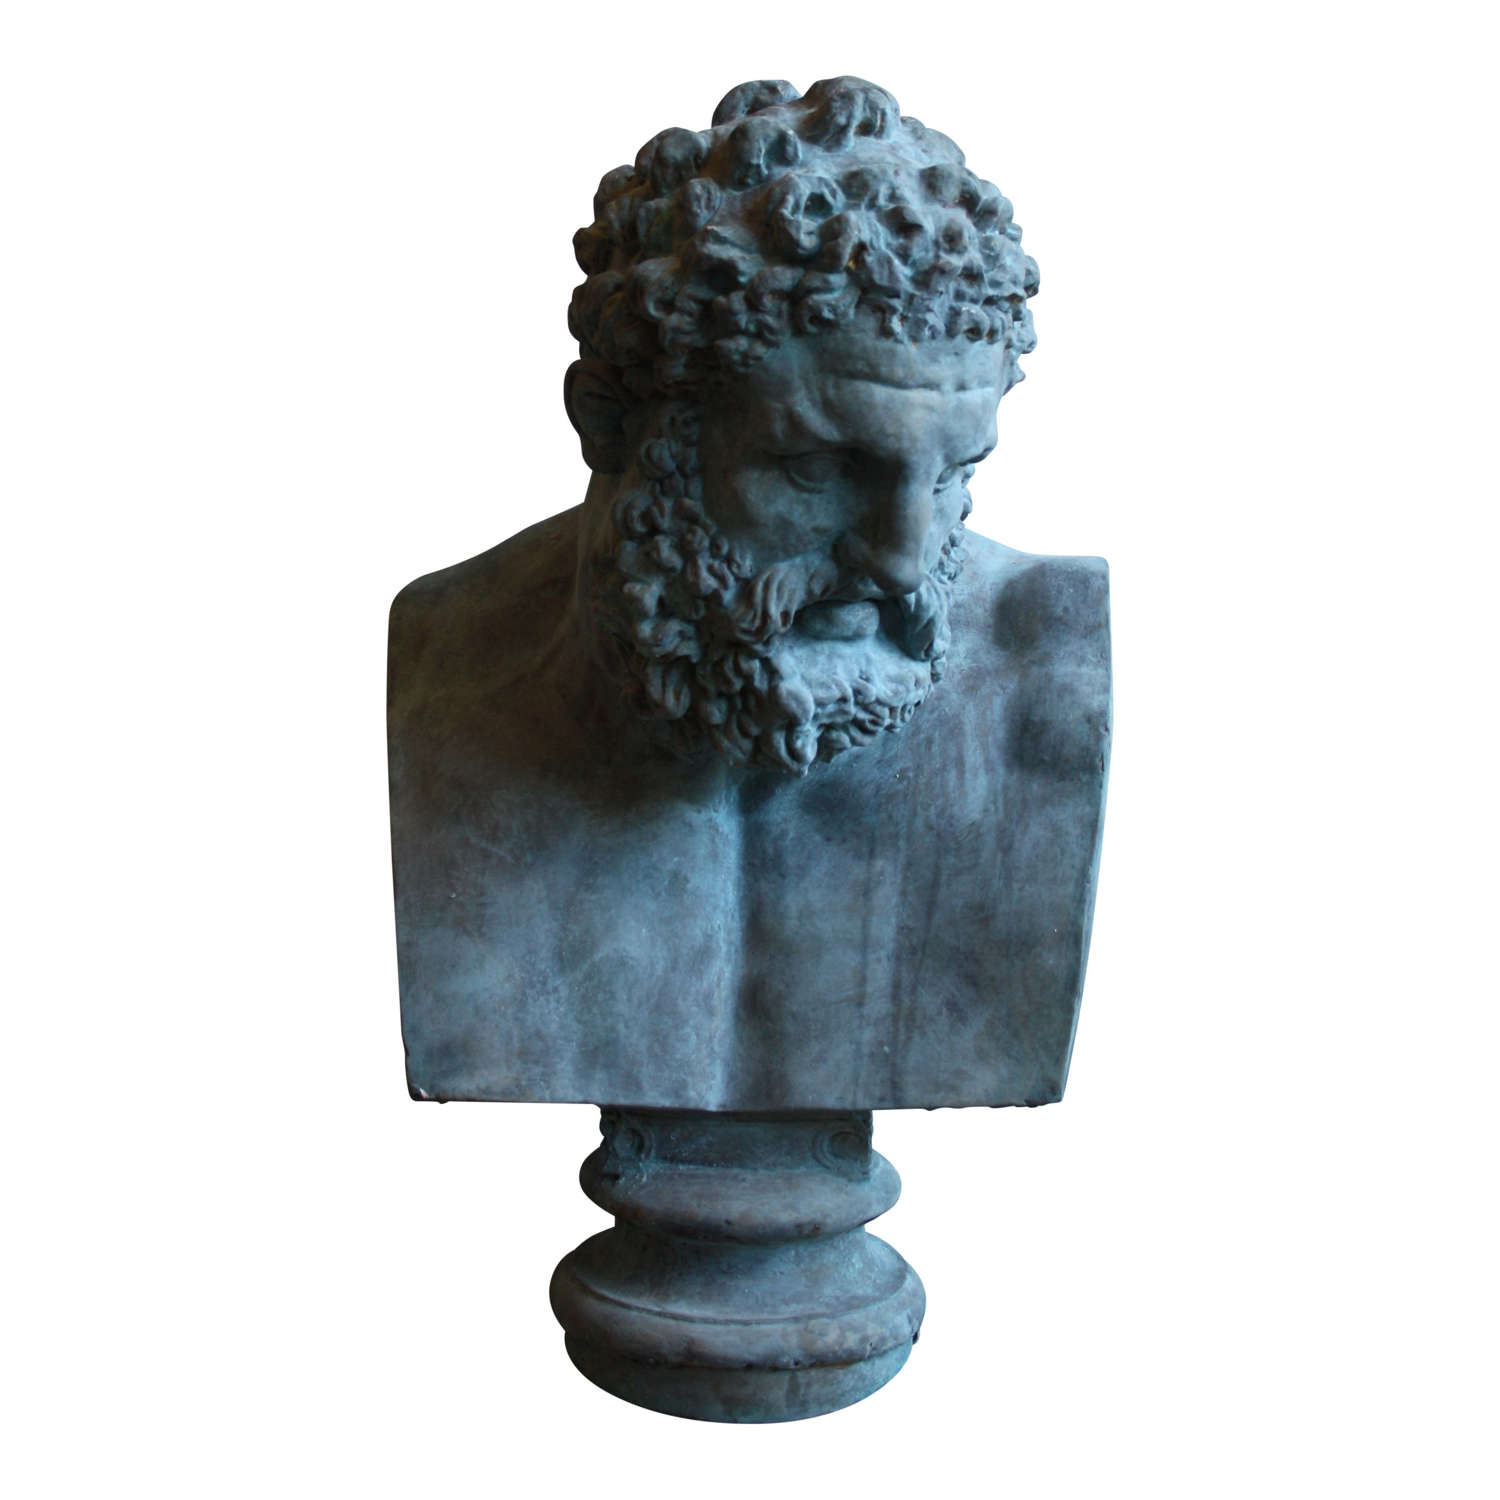 LARGE BUST OF HERCULES AFTER THE ANTIQUE